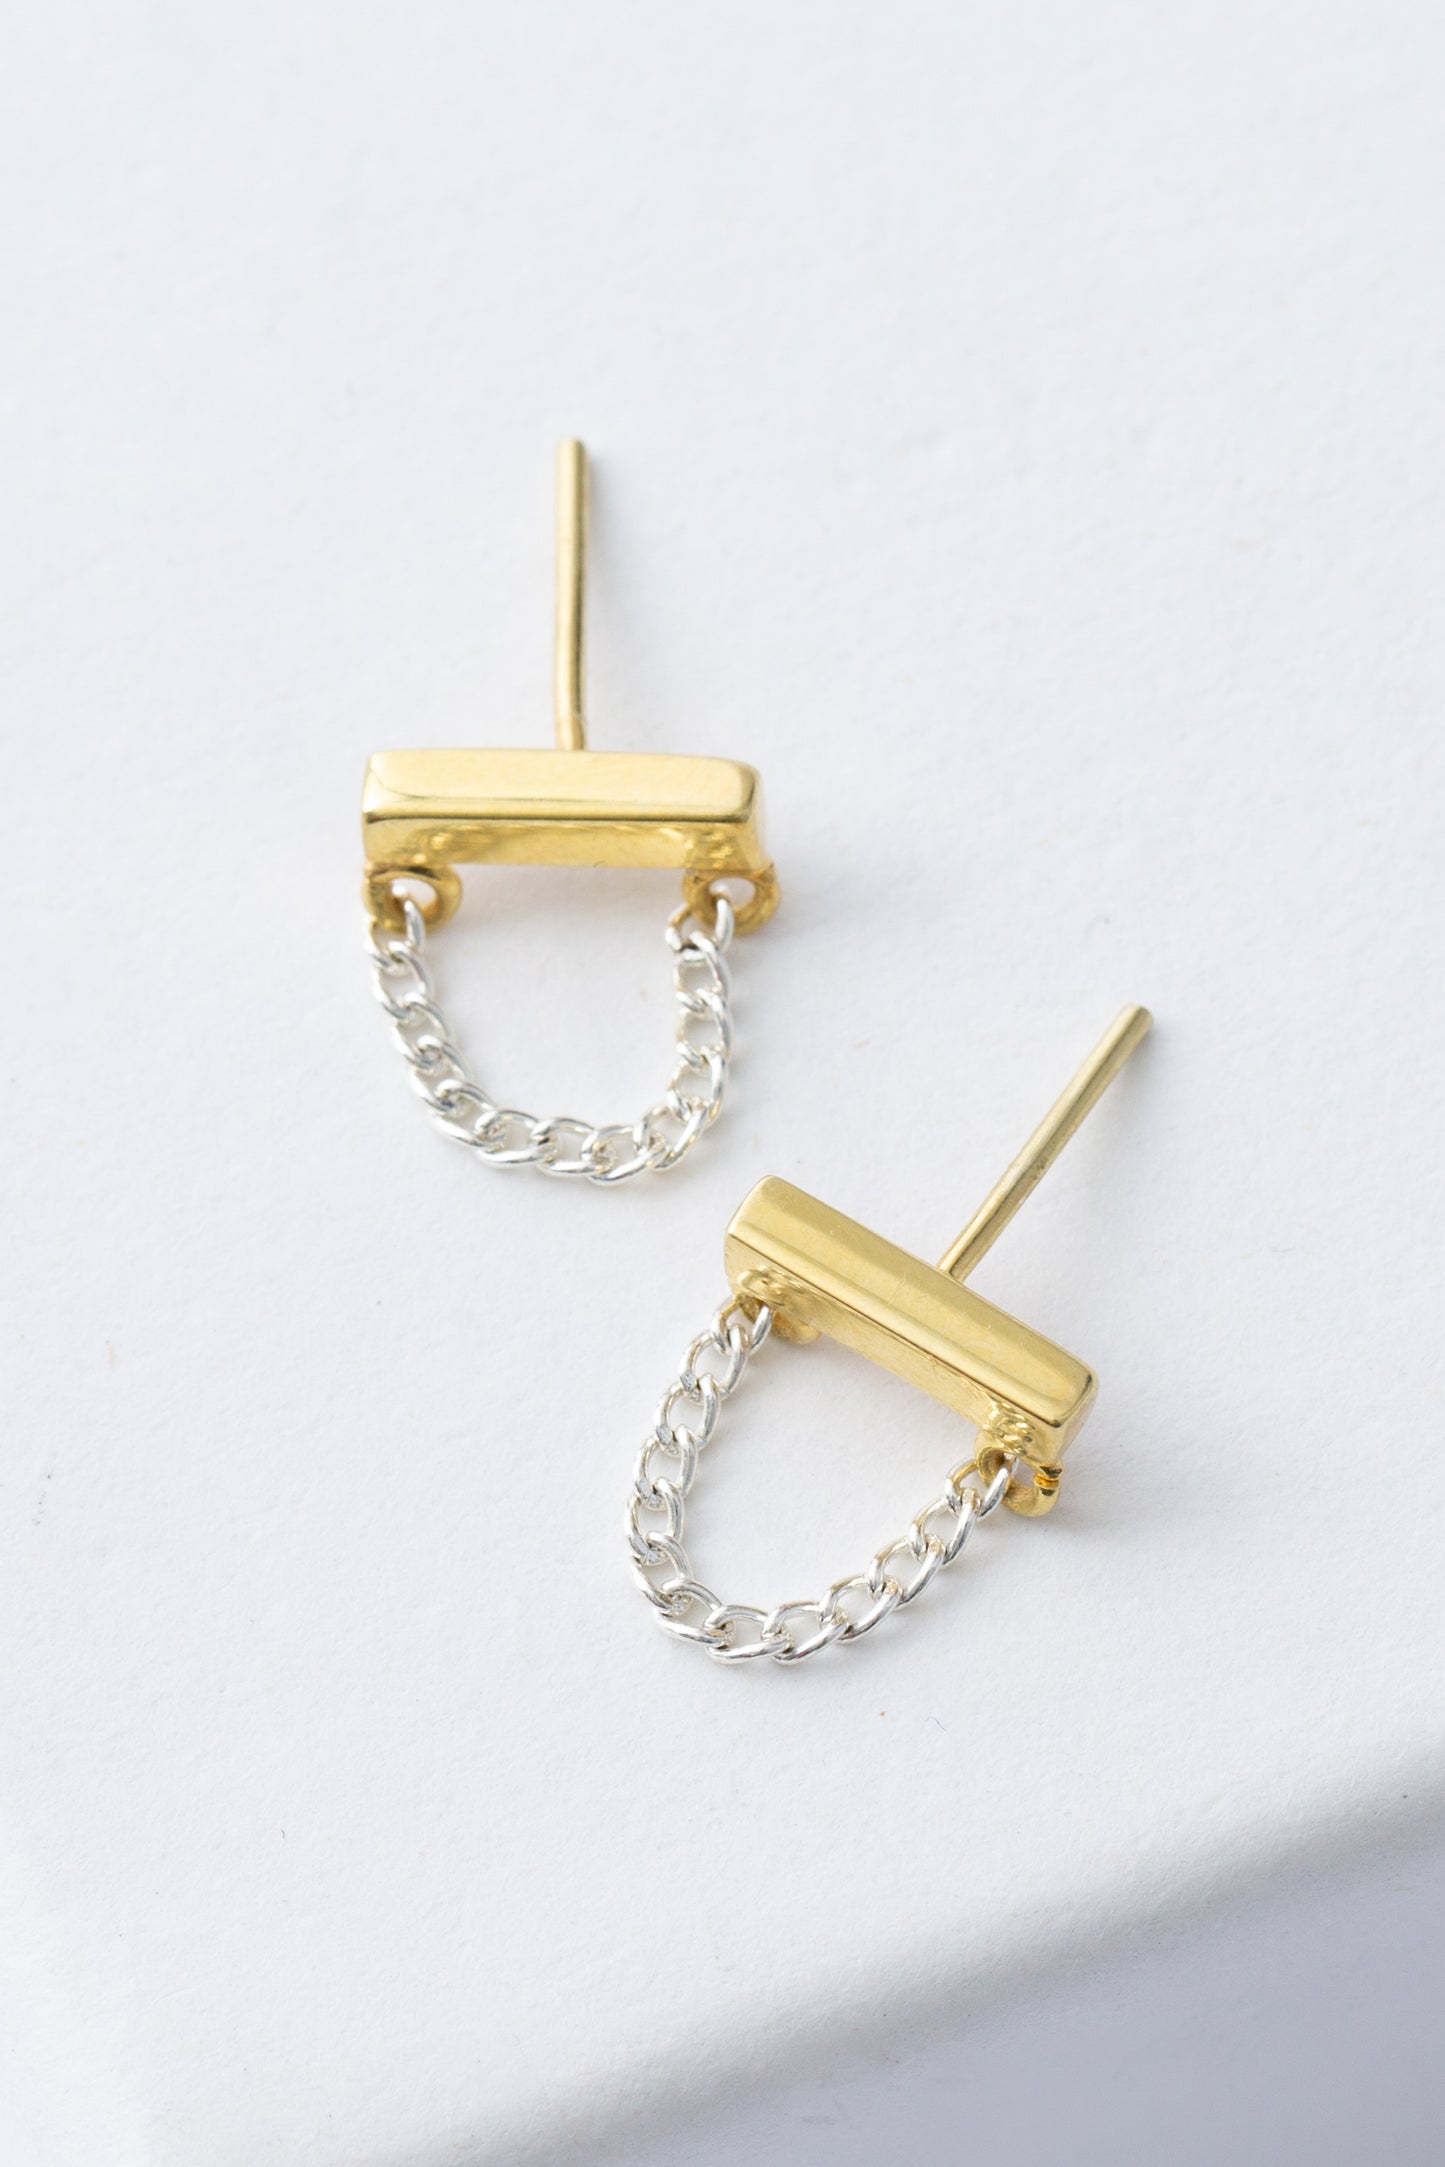 The Silver Lining Studs are silver and gold post earrings. A horizontal gold bar is accented with a silver chain that hangs down in a loop. 